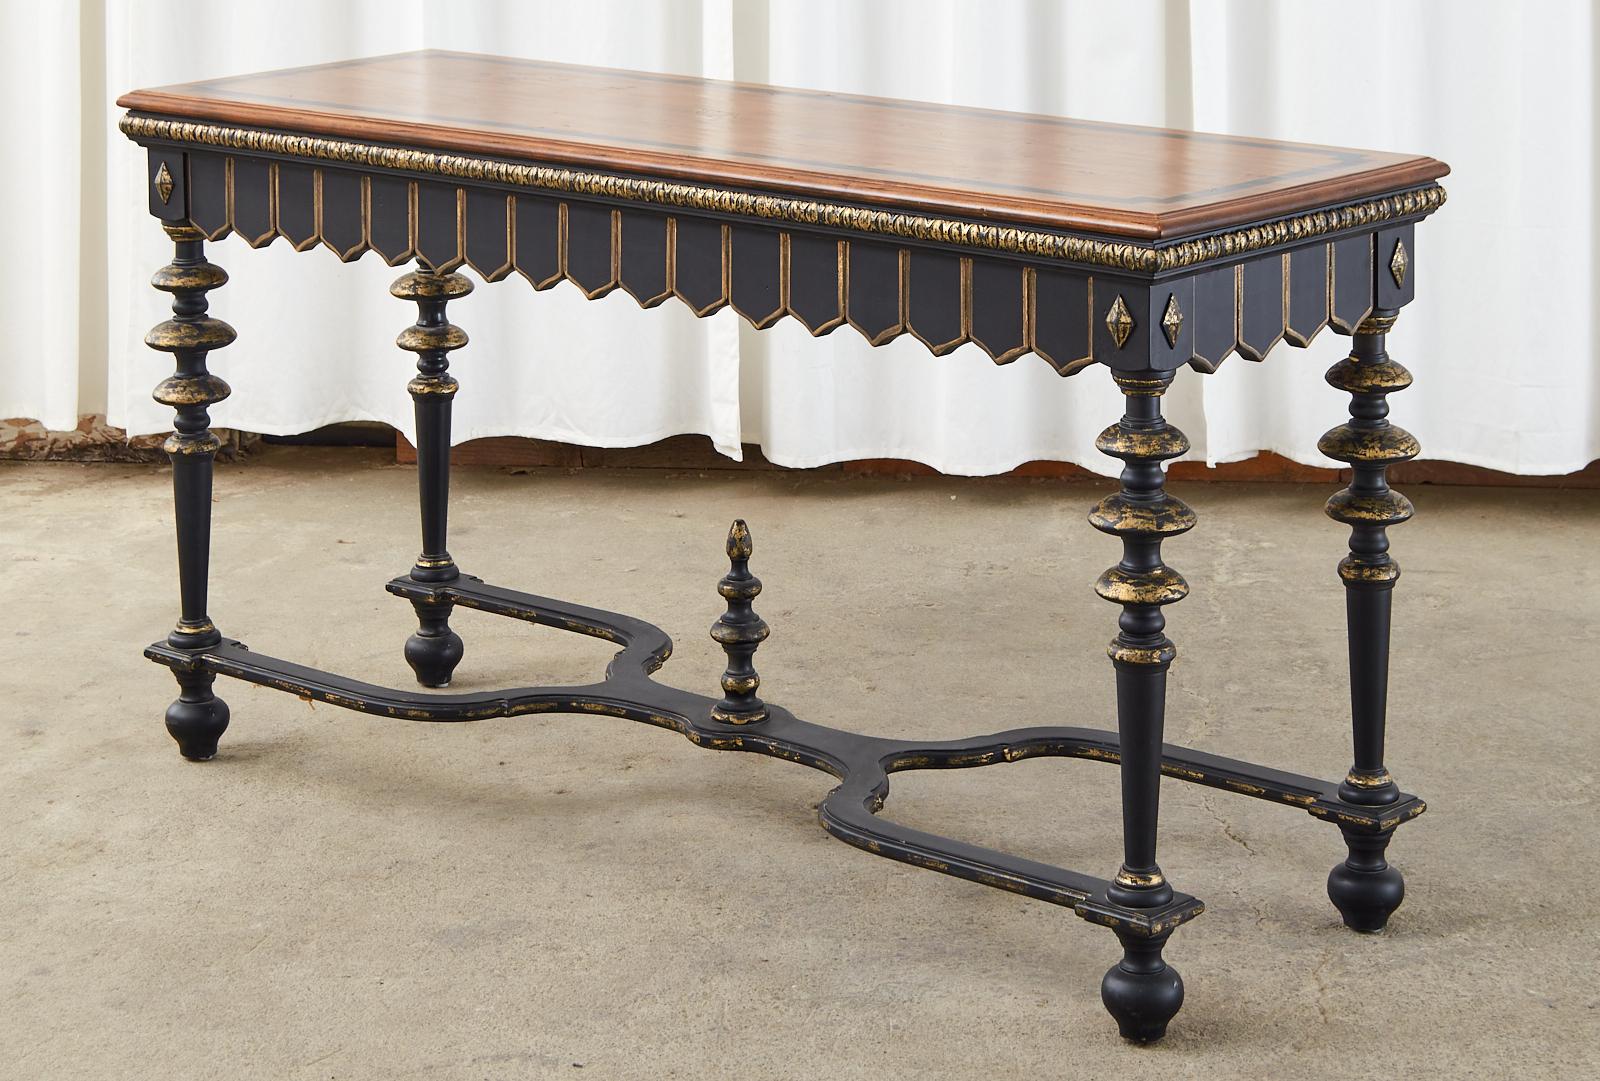 Stunning ebonized console table or library table crafted in the Portuguese Baroque style the table features a gadrooned border above the frieze with geometric shaped moldings below. The trestle style base has dramatic turned legs ending with ball